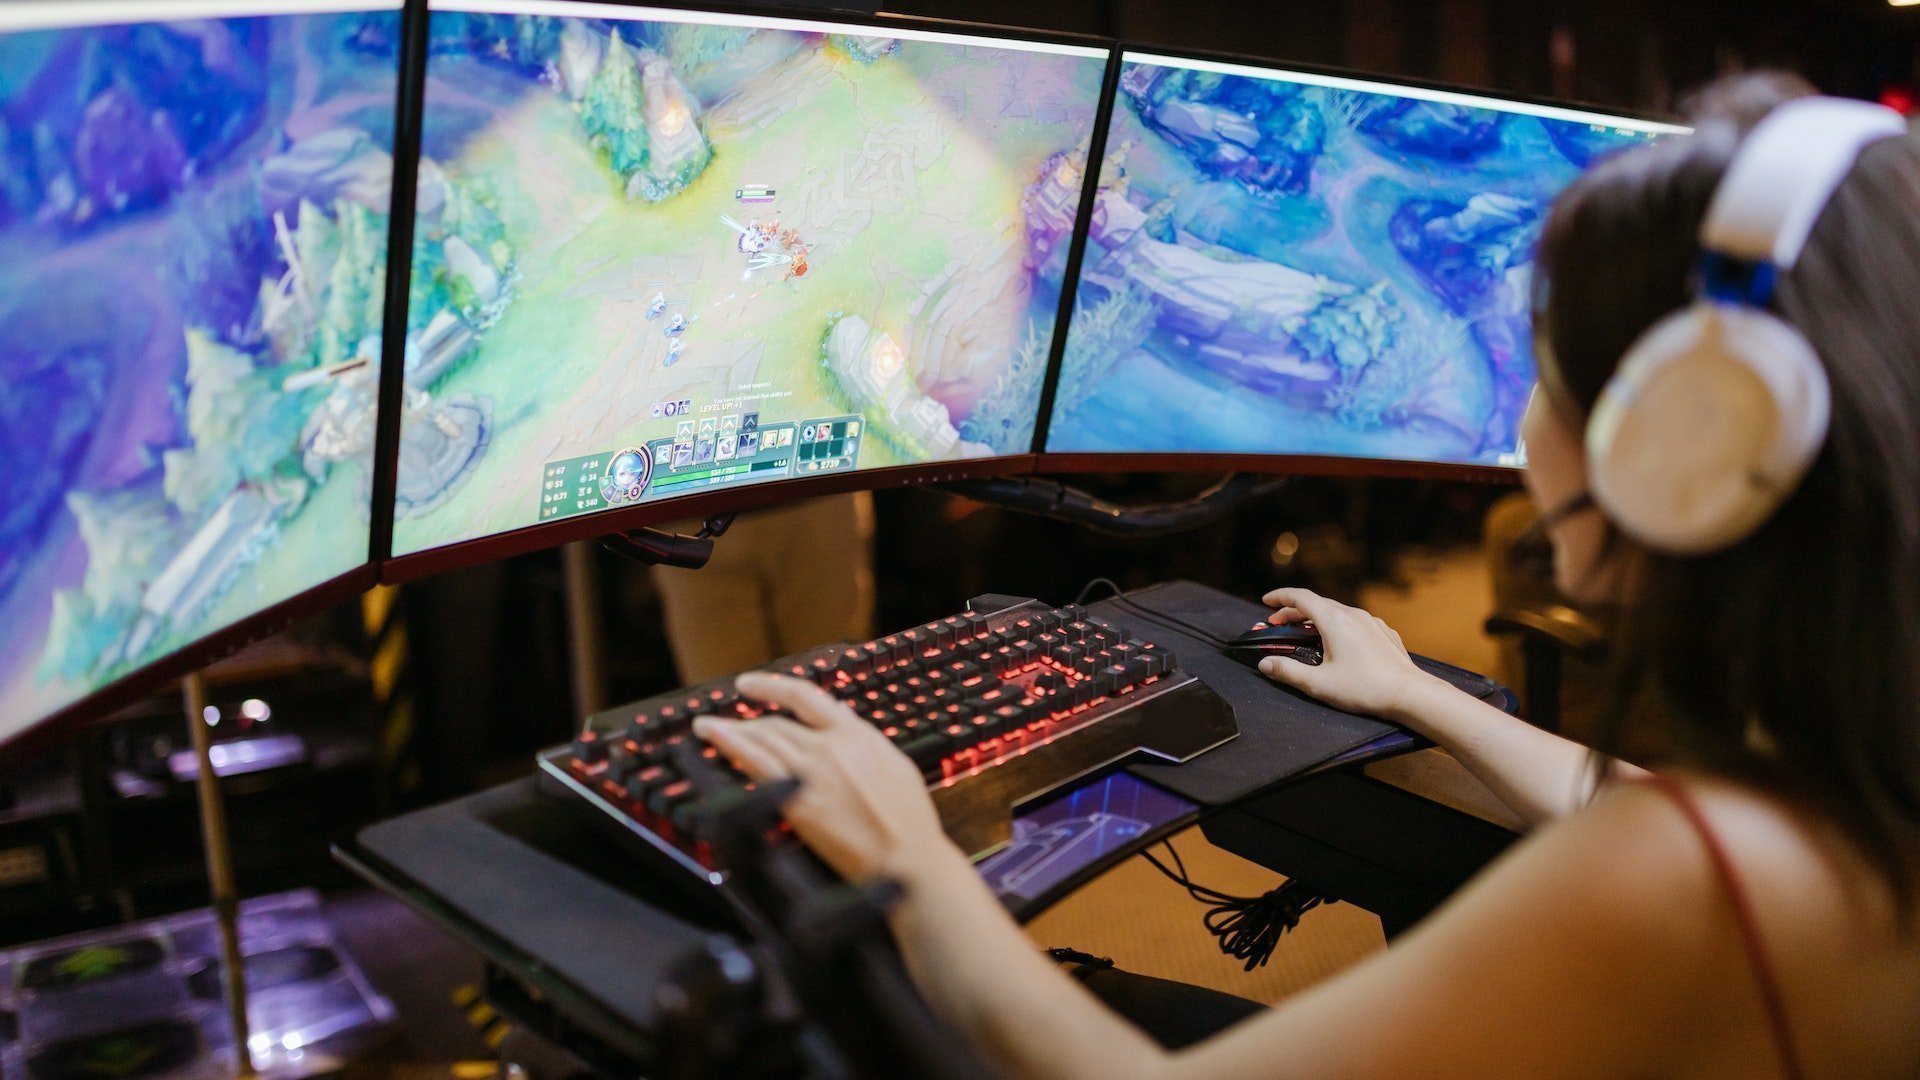 A Lady Playing League of Legends on PC